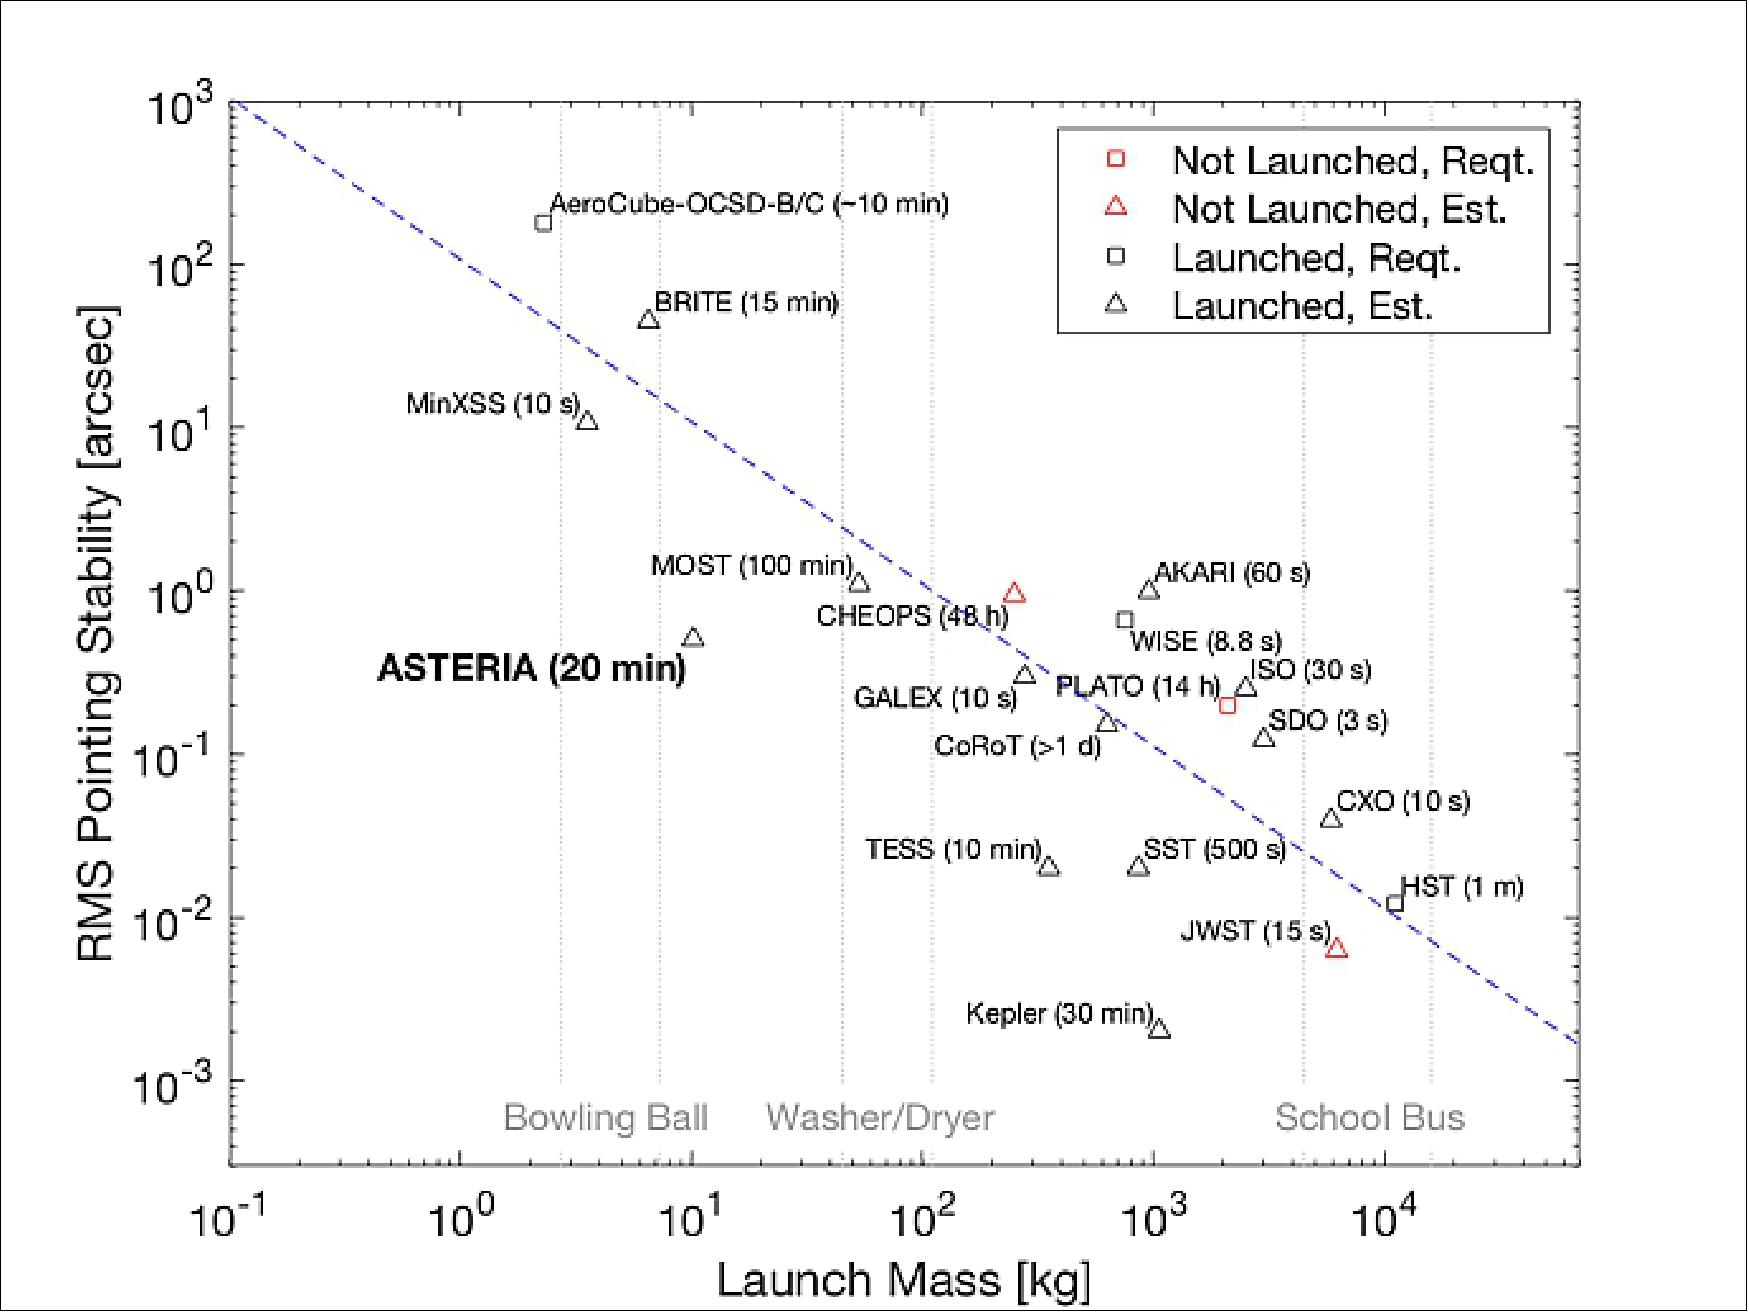 Figure 10: Pointing stability vs. mass of various missions (image credit: NASA/JPL)